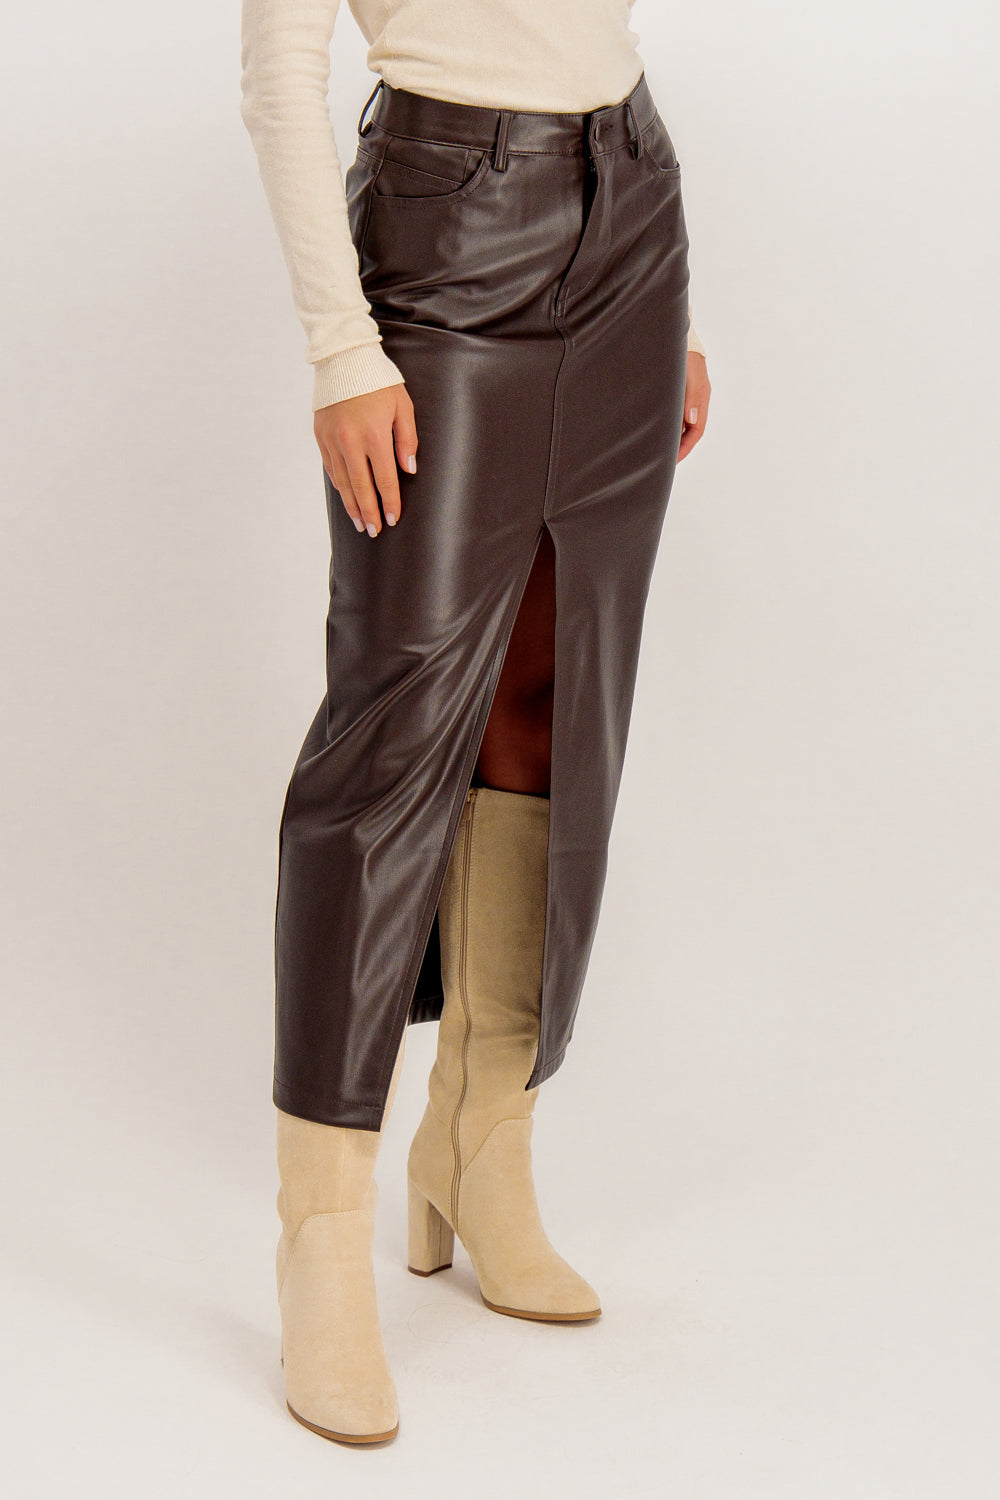 Beverly Coffe Brown Faux Leather Skirt